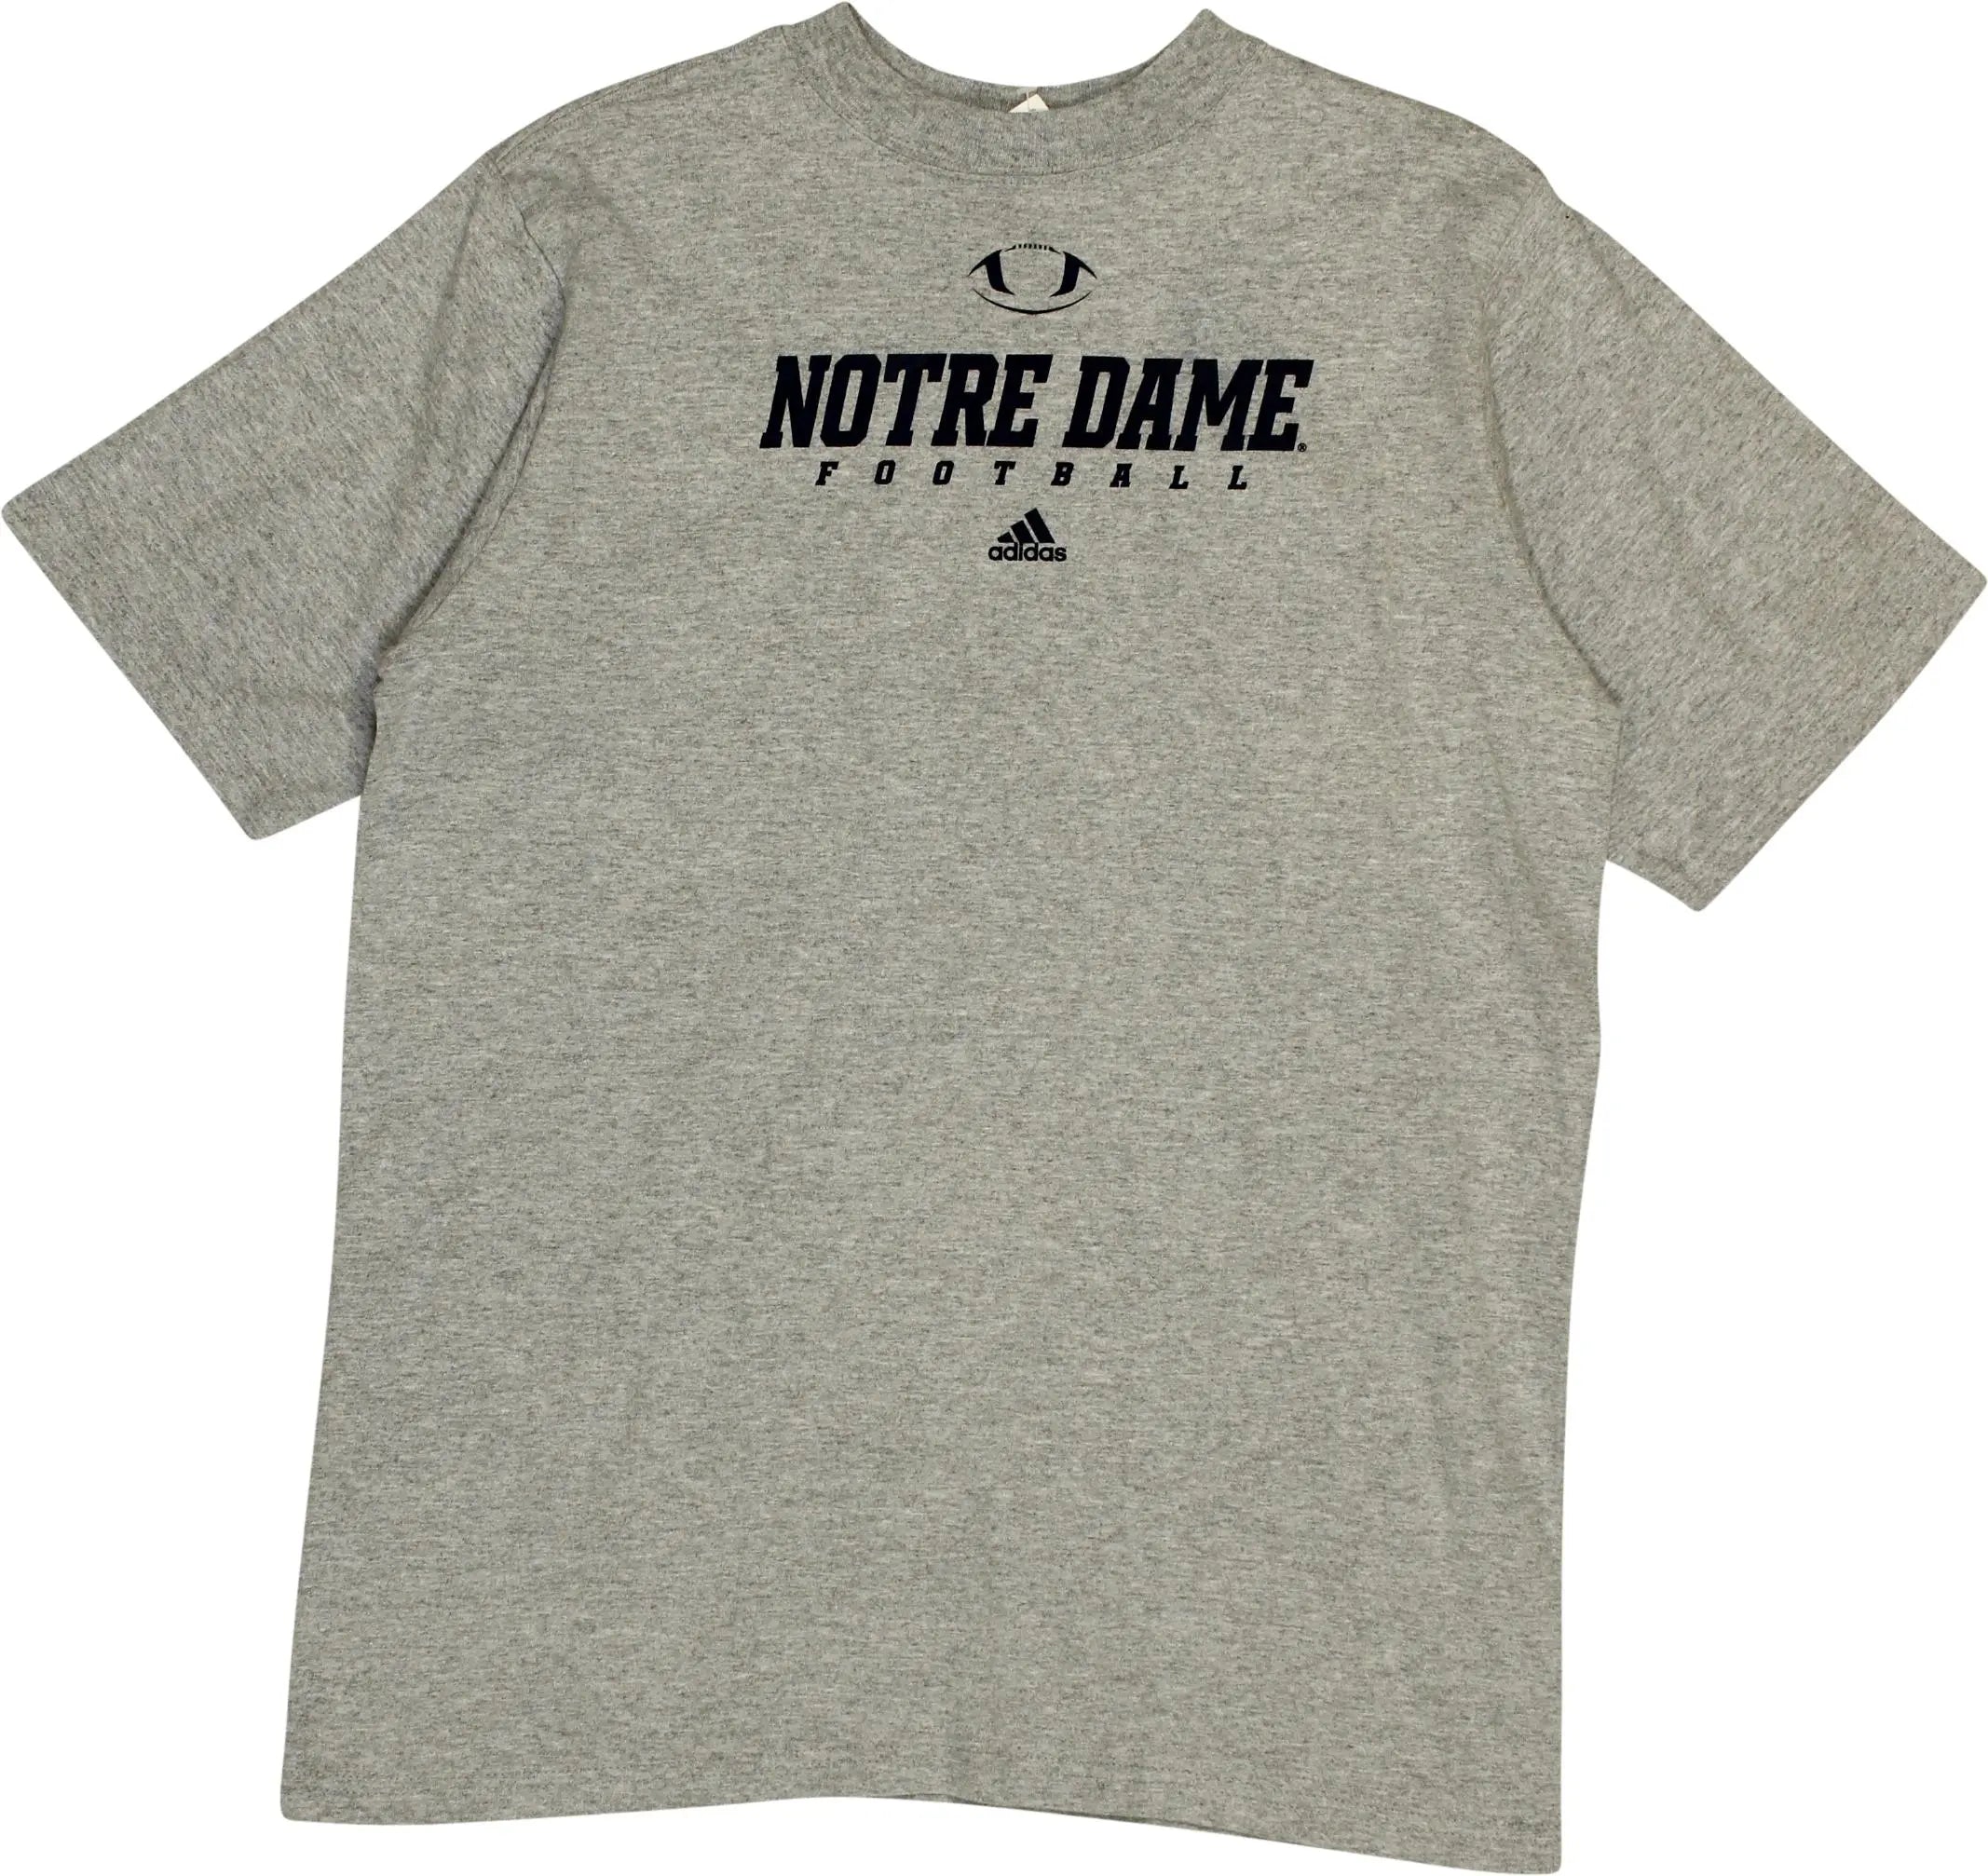 Adidas - Notre Dame Football T-shirt- ThriftTale.com - Vintage and second handclothing